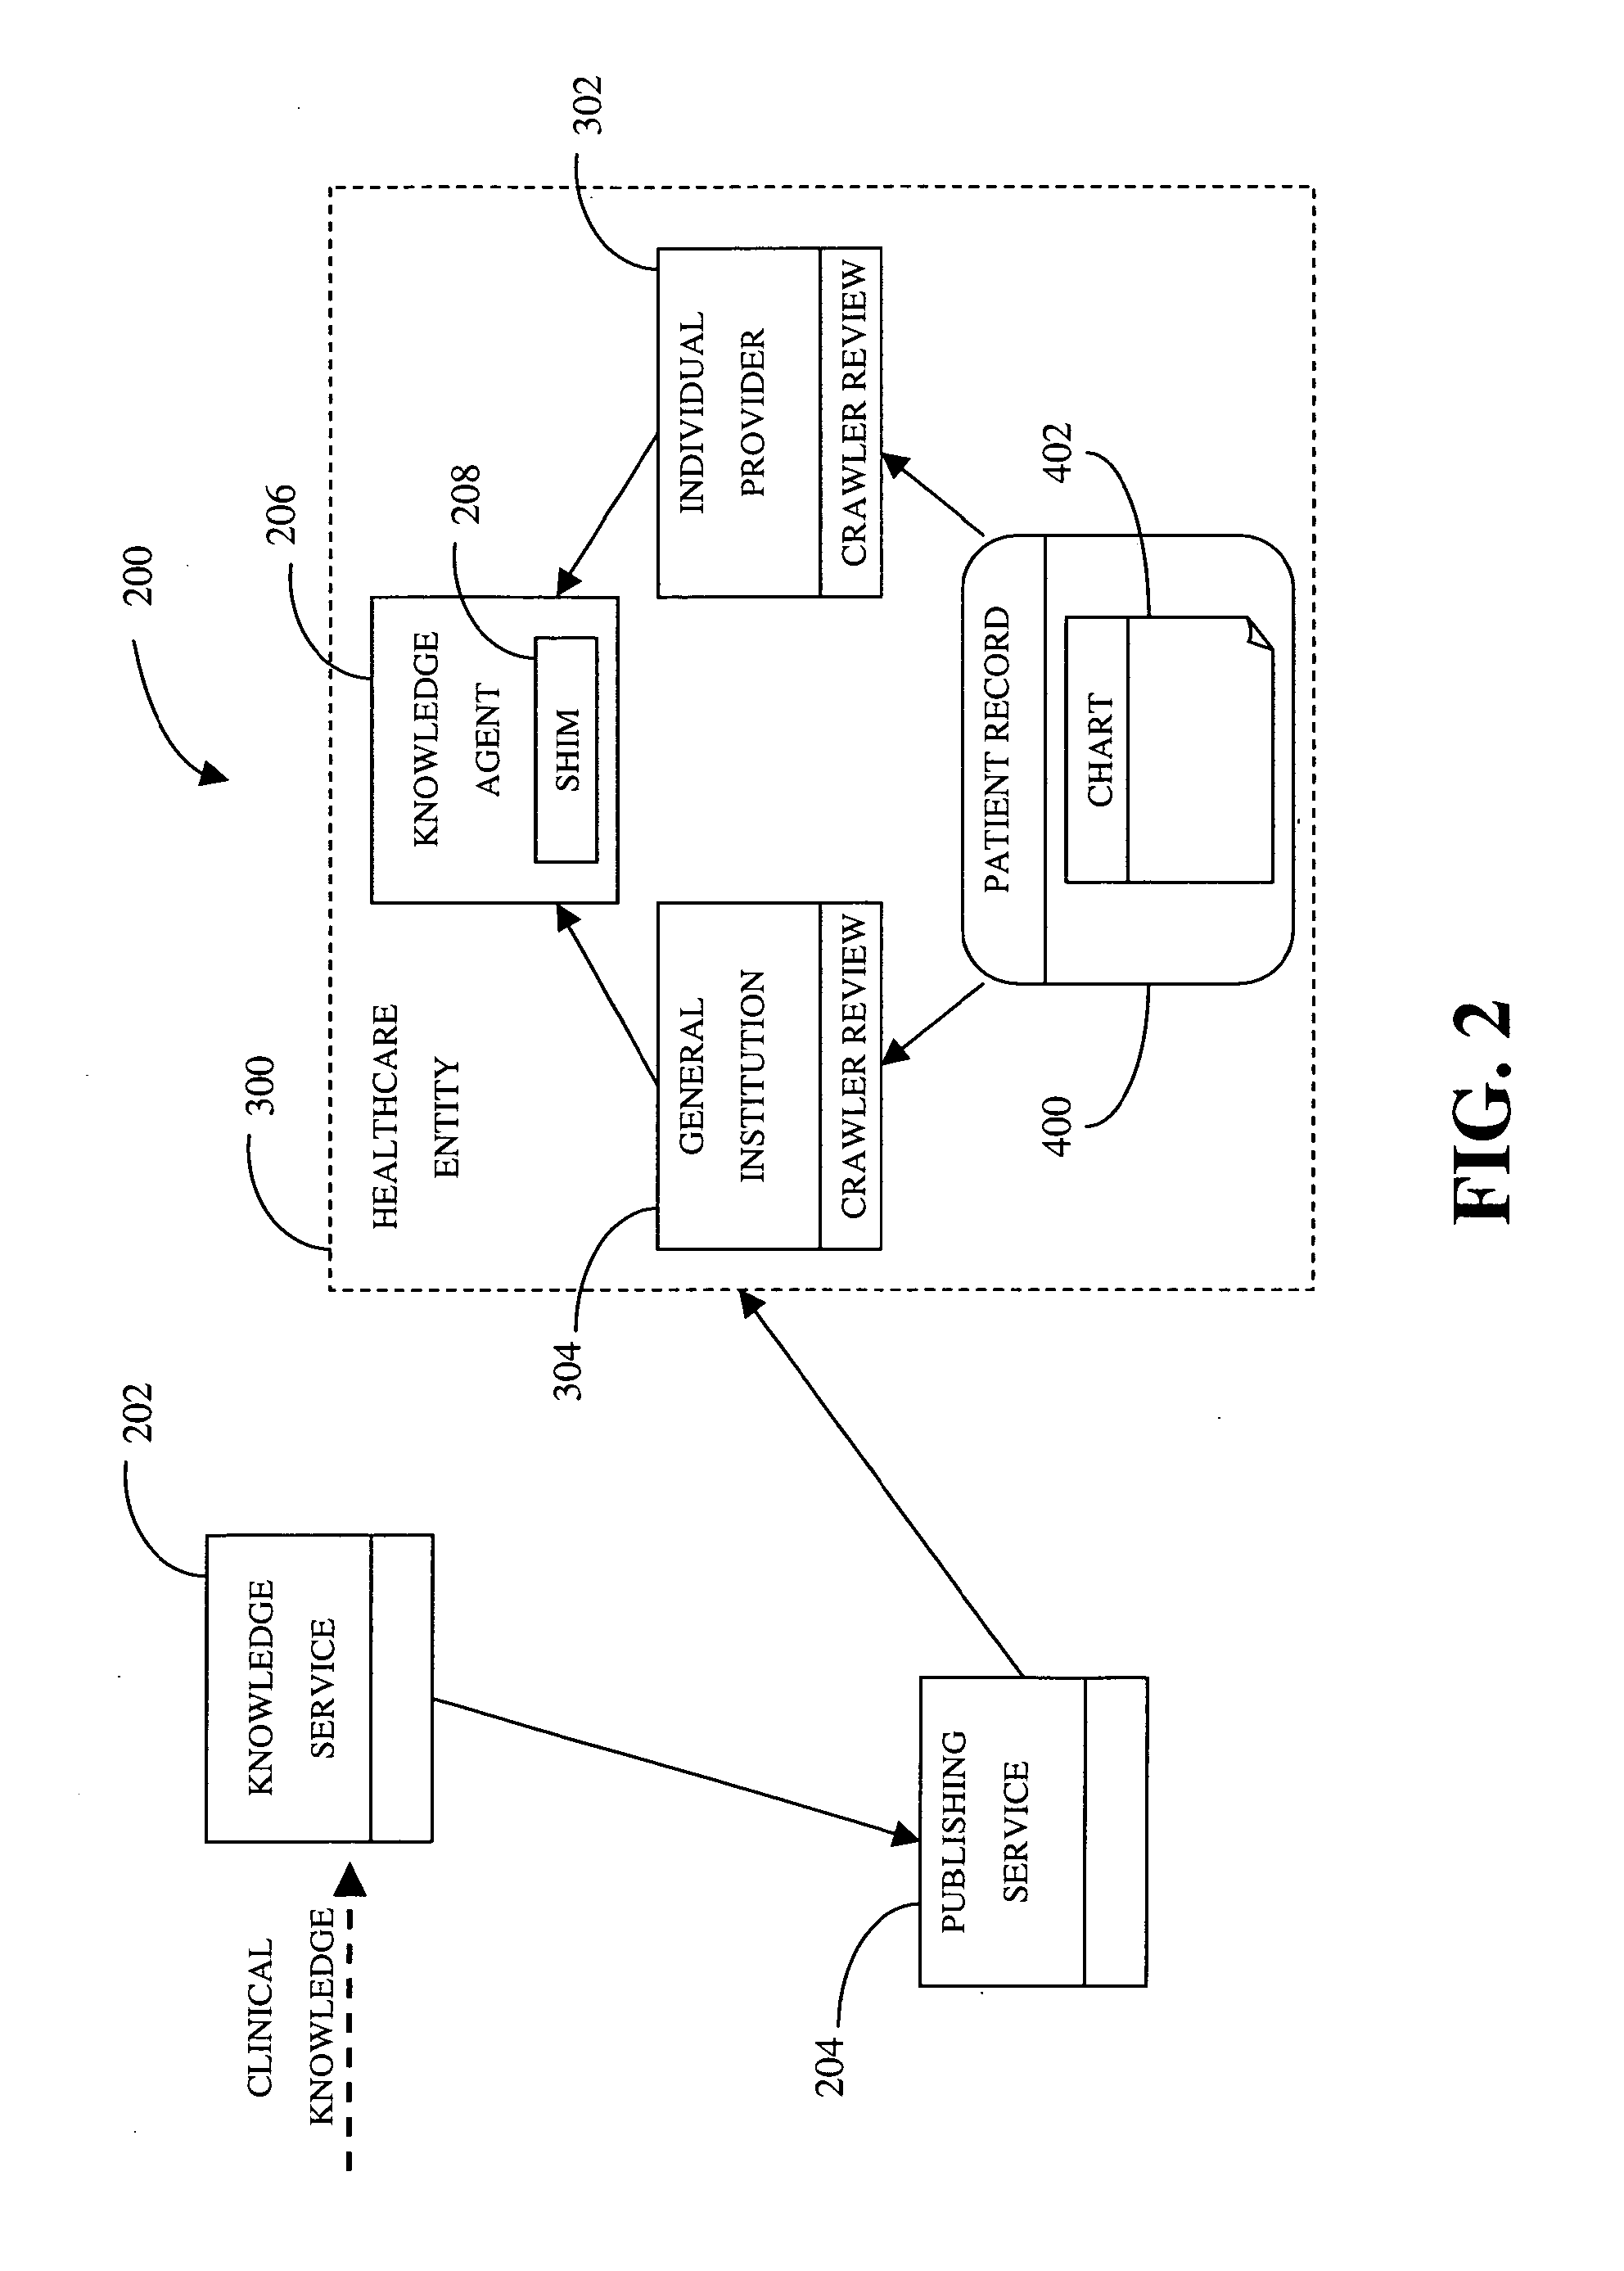 System and method for distributed analysis of patient records